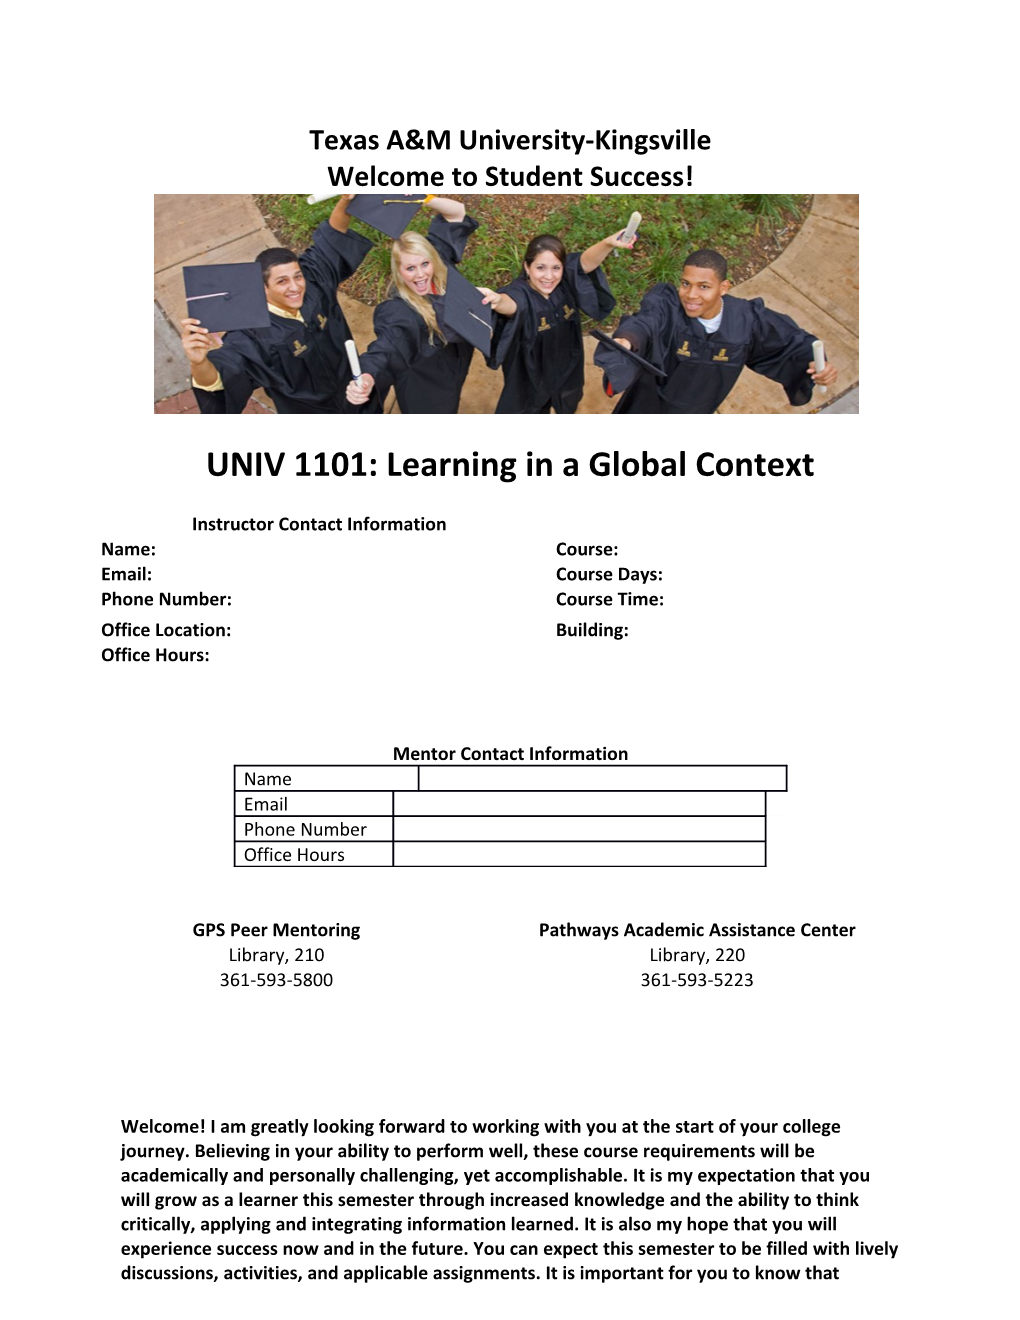 UNIV 1101: Learning in a Global Context